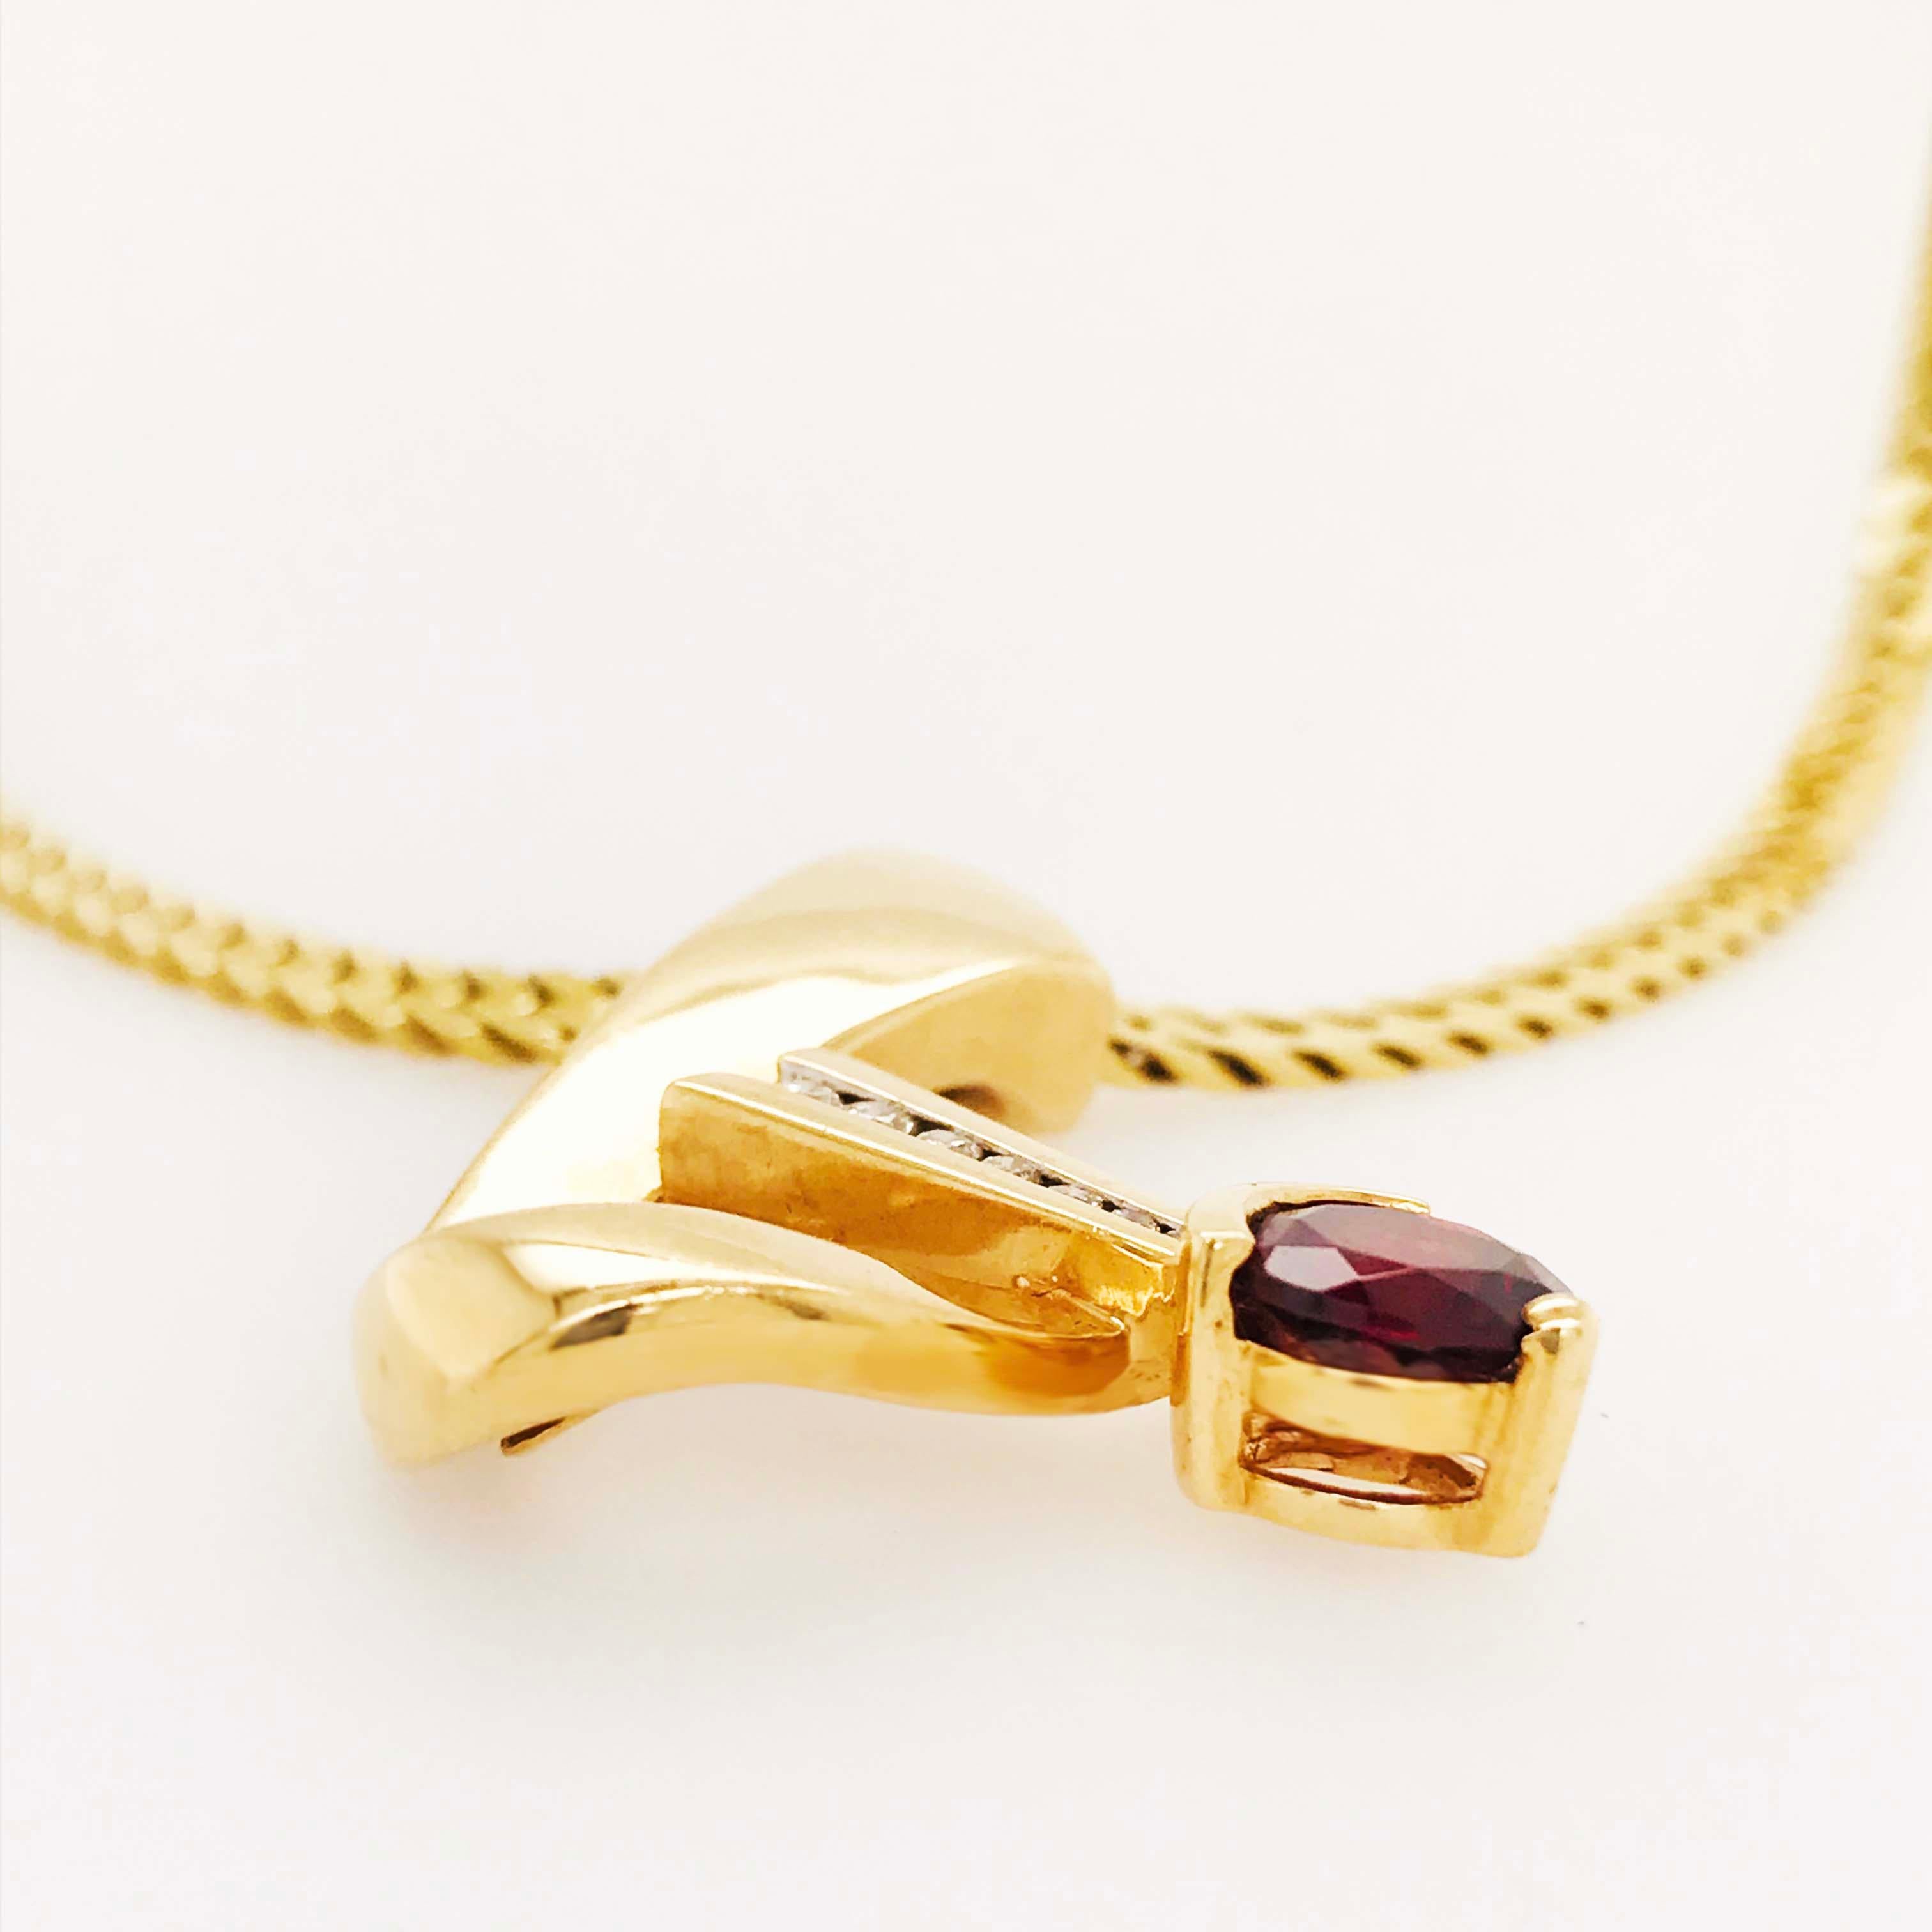 Retro Garnet Slide Pendant with Diamonds and Heavy Flat Cable Chain Necklace 2